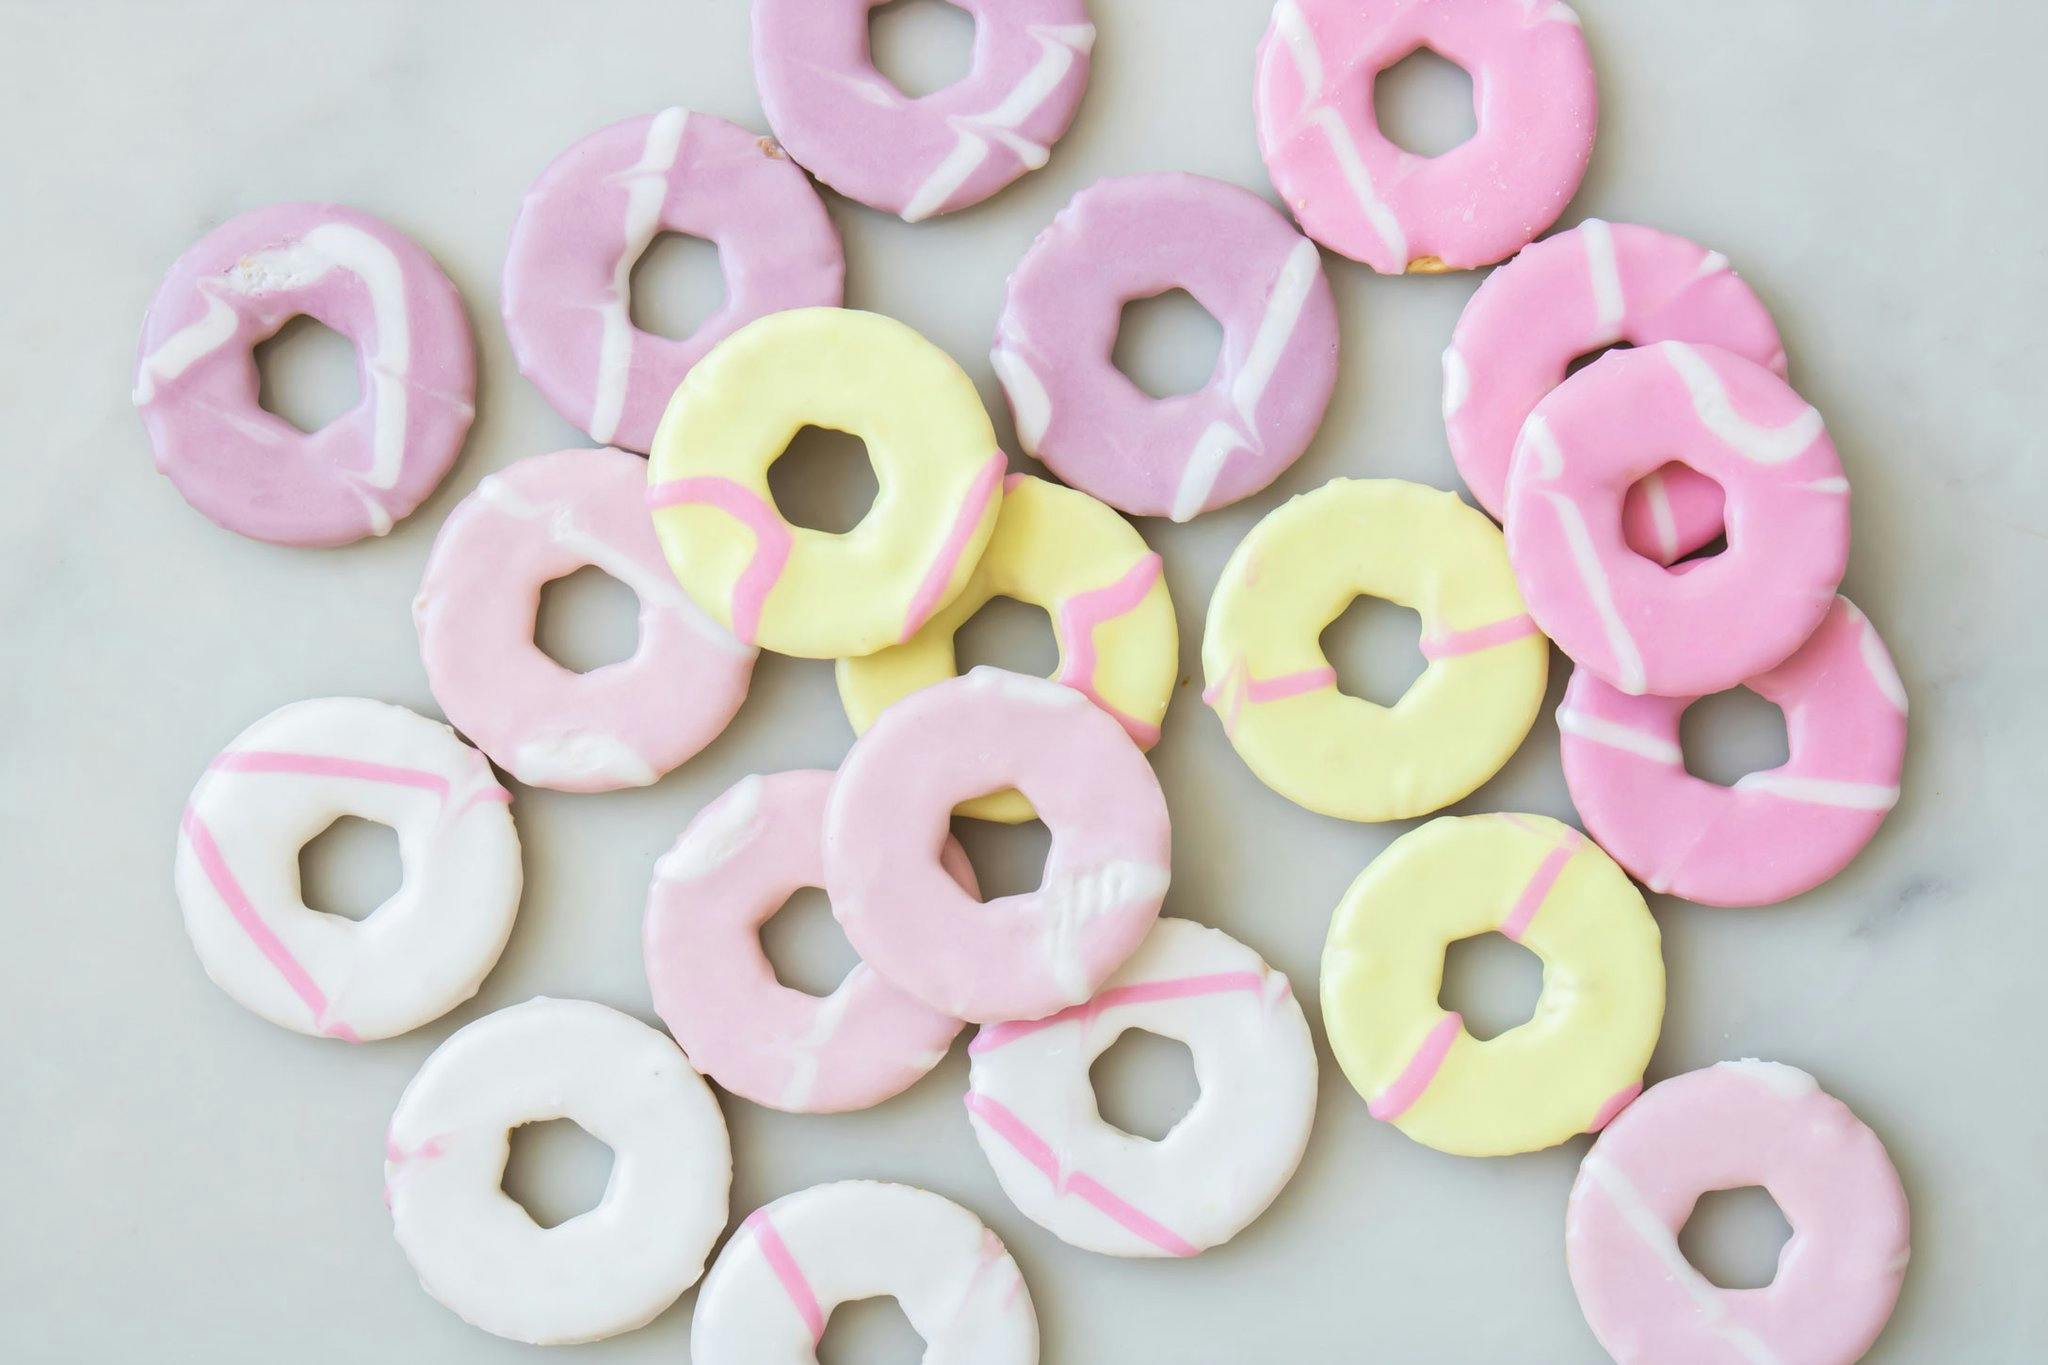 Close up image of party rings layed over a table.